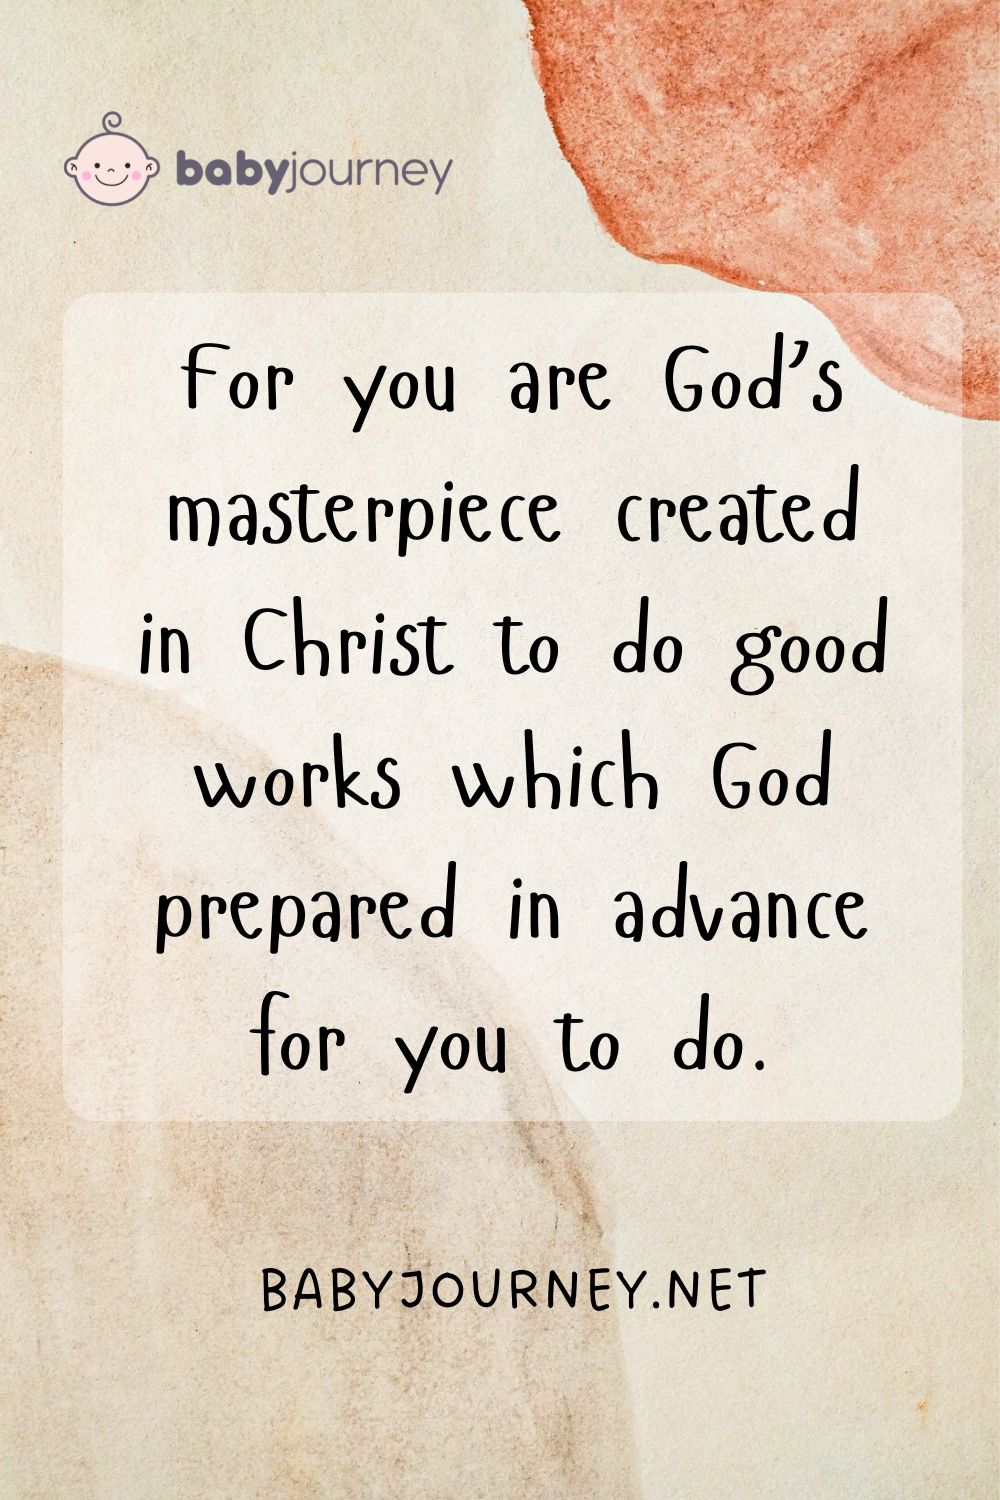 For you are God’s masterpiece created in Christ to do good works which God prepared in advance for you to do. - Happy baptism quotes - Baby Journey